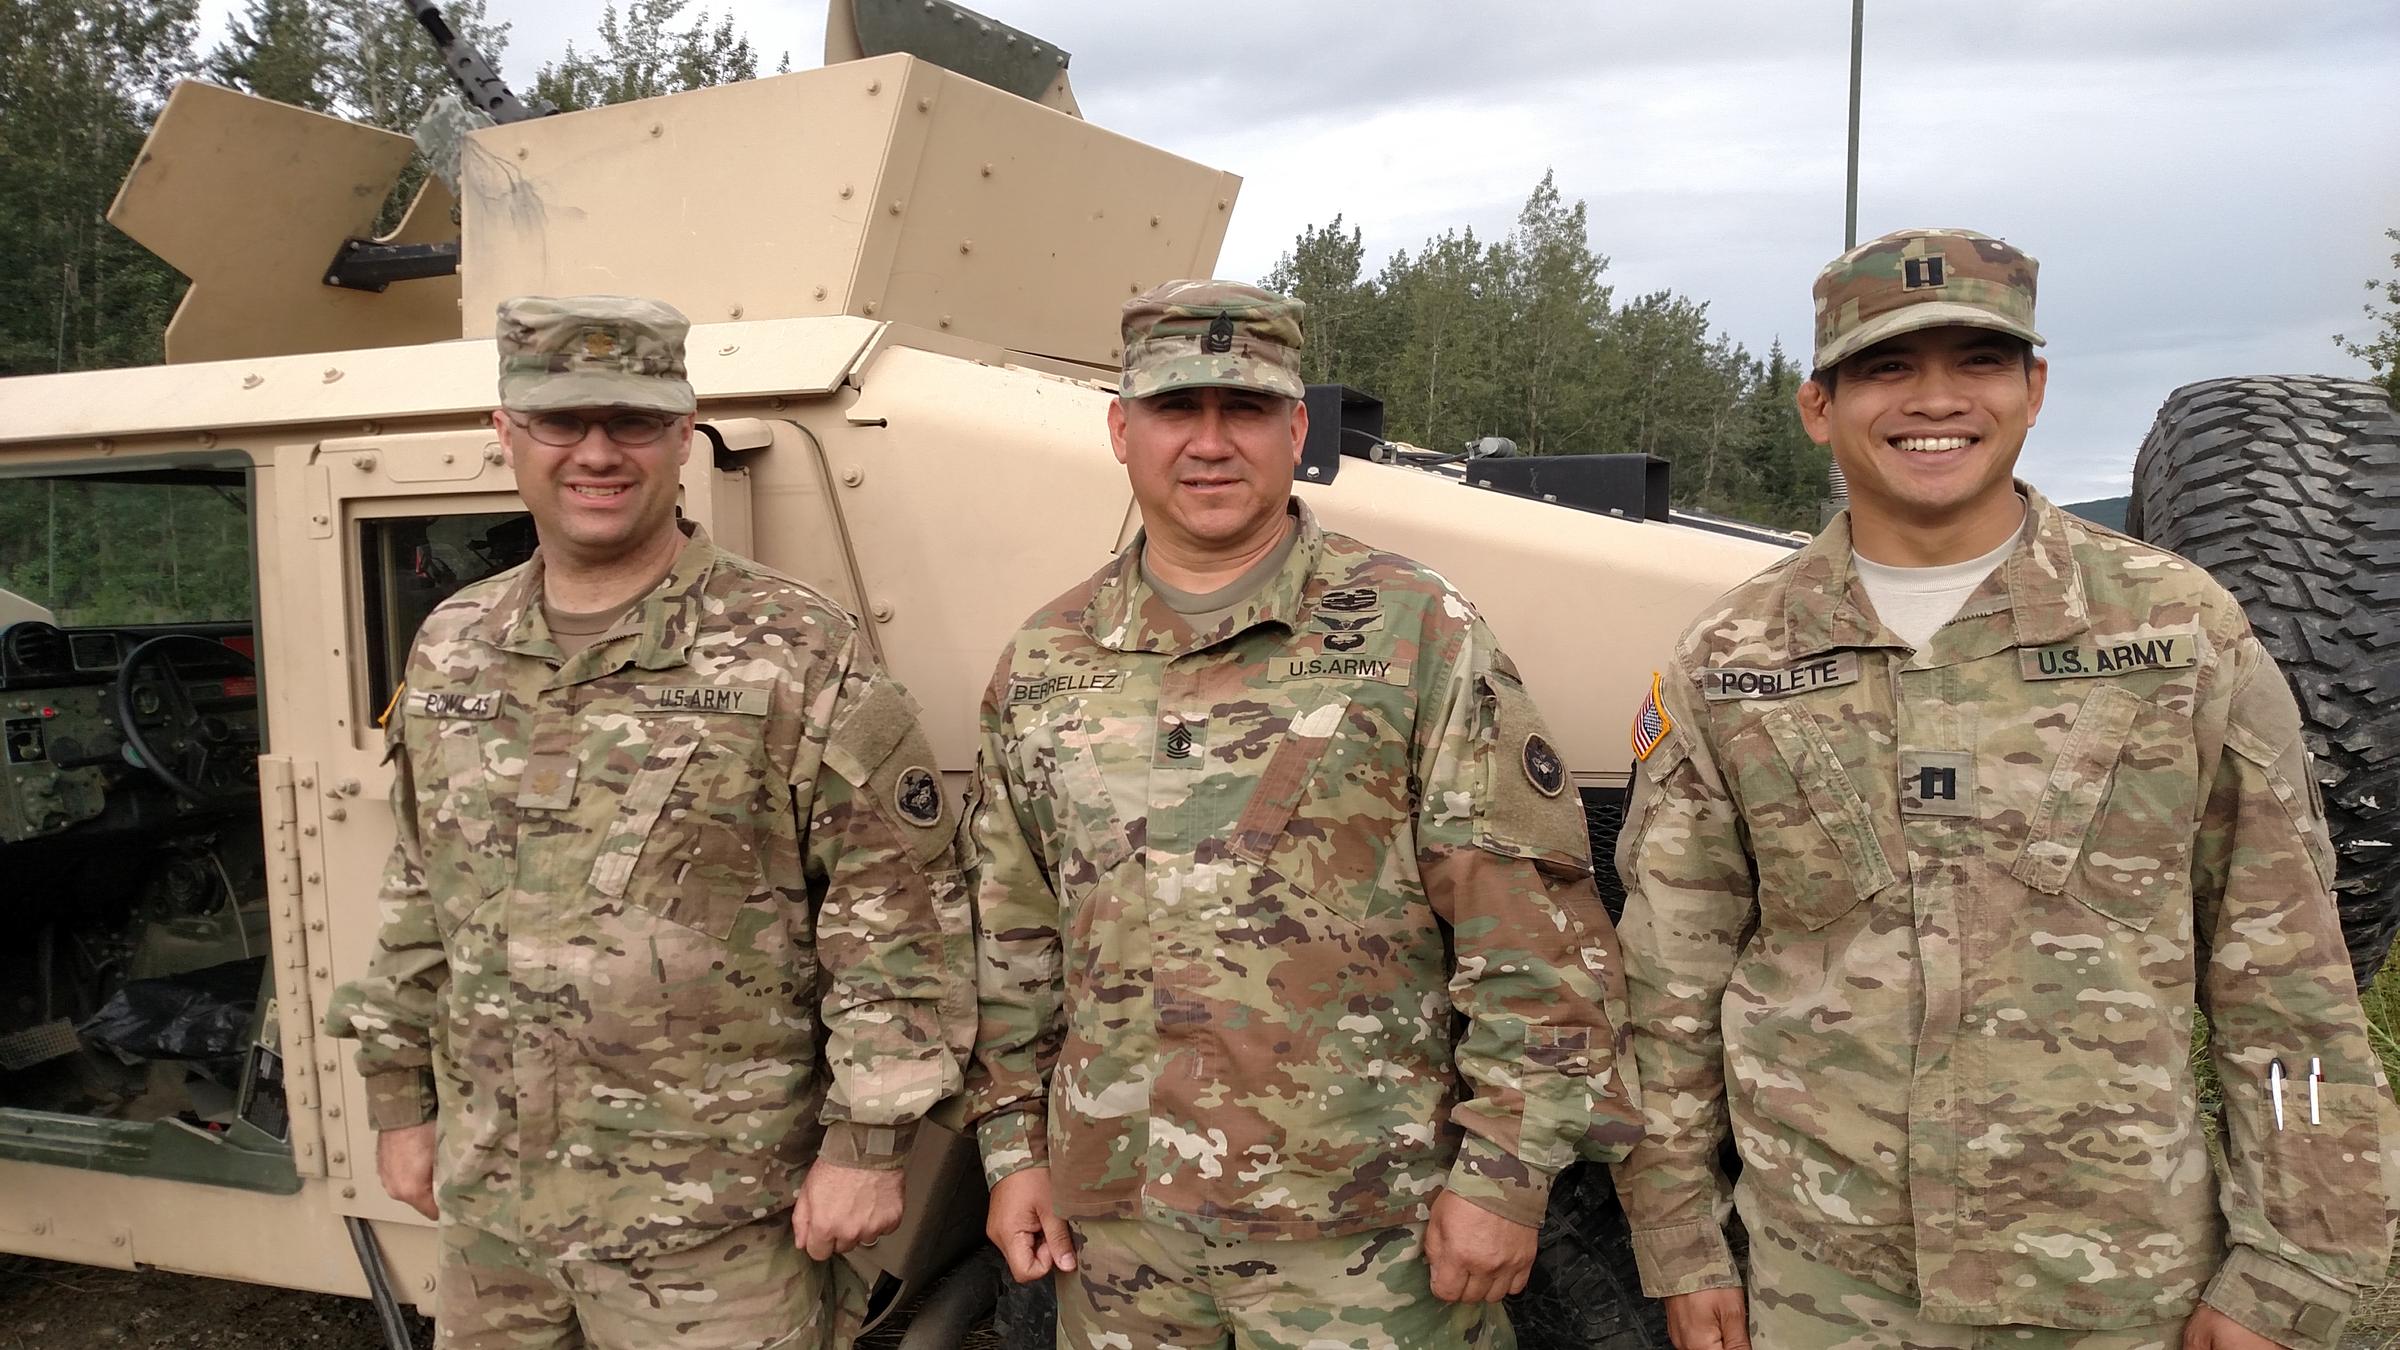 Fort Wainwright soldiers who helped handle Arctic Anvil logistical support, from left: Maj. Tim Powlas, 17th Combat Sustainment Battalion; Ist Sgt. David Barrellez, 539th Transportation Company; Capt. Joshua Poblete, 574th Composite Supply Company. (Photo by Tim Ellis, KUAC - Fairbanks)